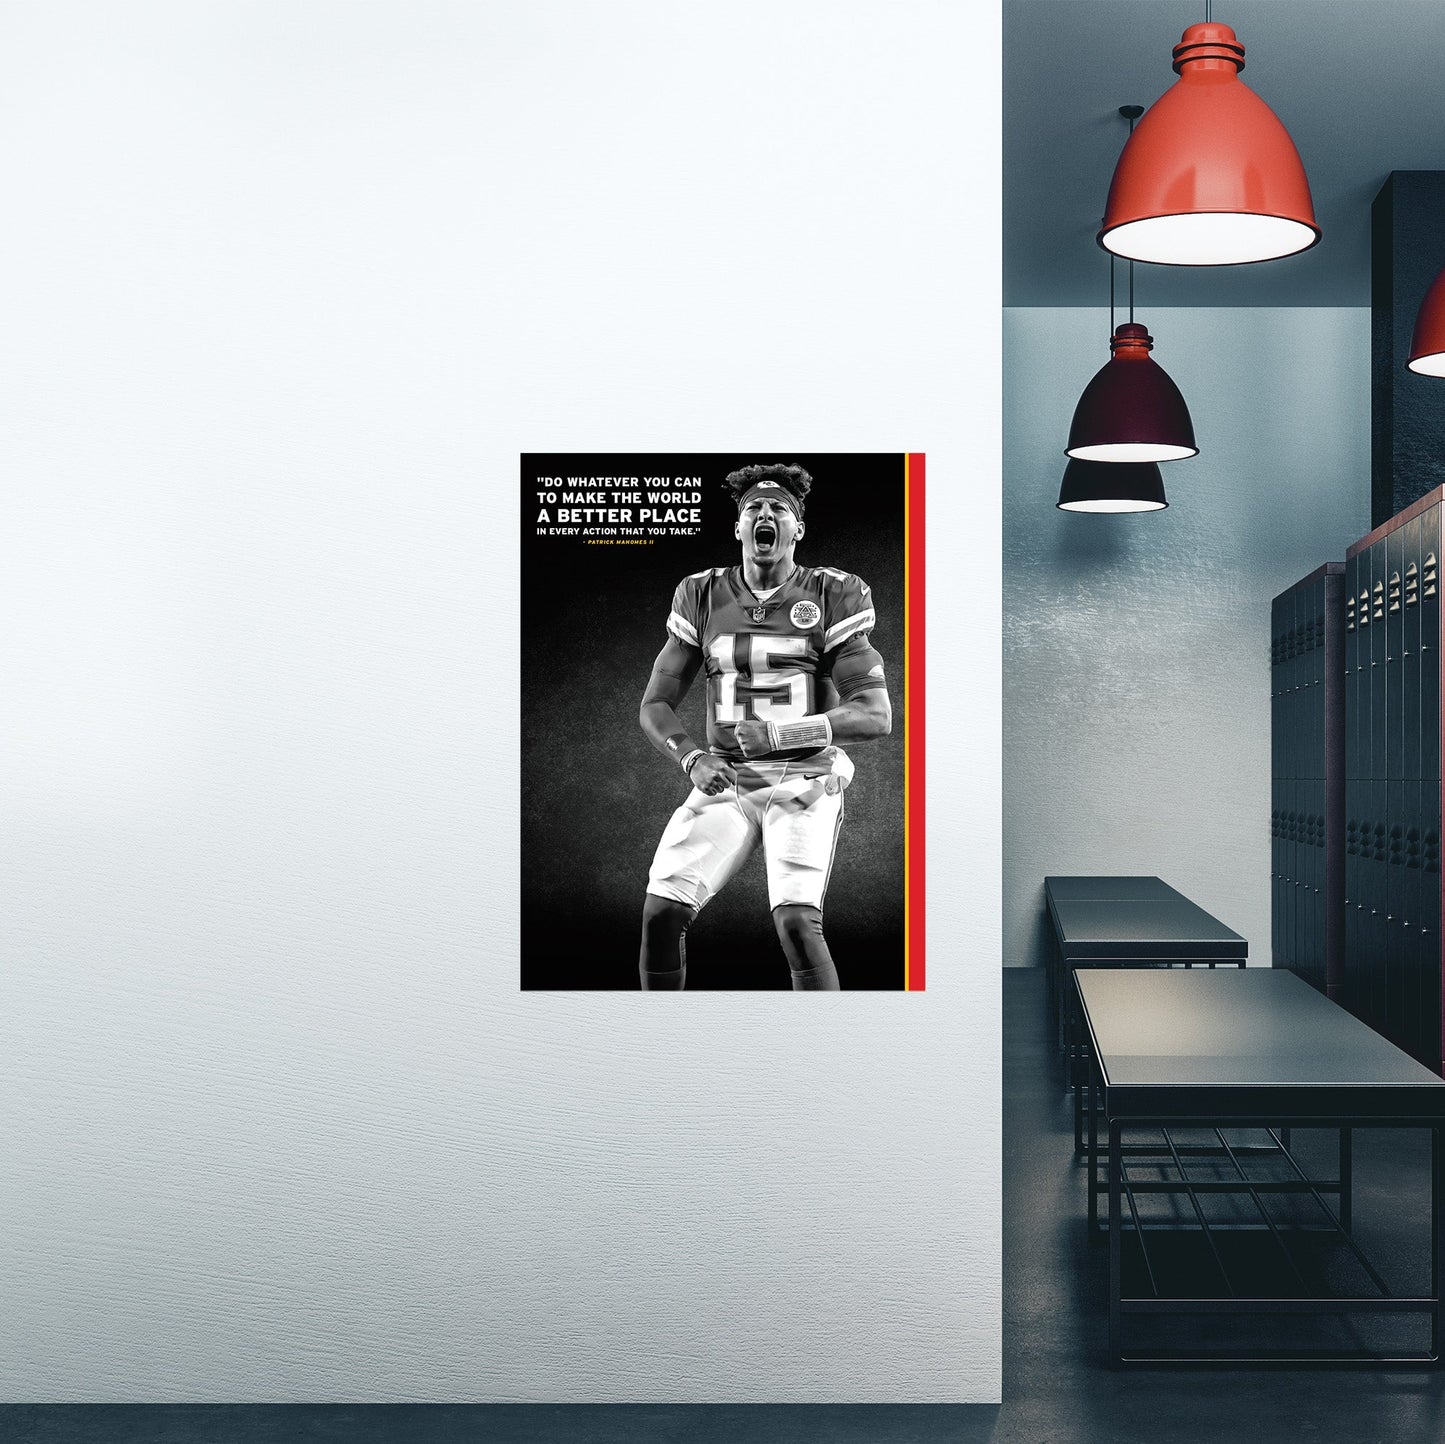 Kansas City Chiefs: Patrick Mahomes II Inspirational Poster - Officially Licensed NFL Removable Adhesive Decal